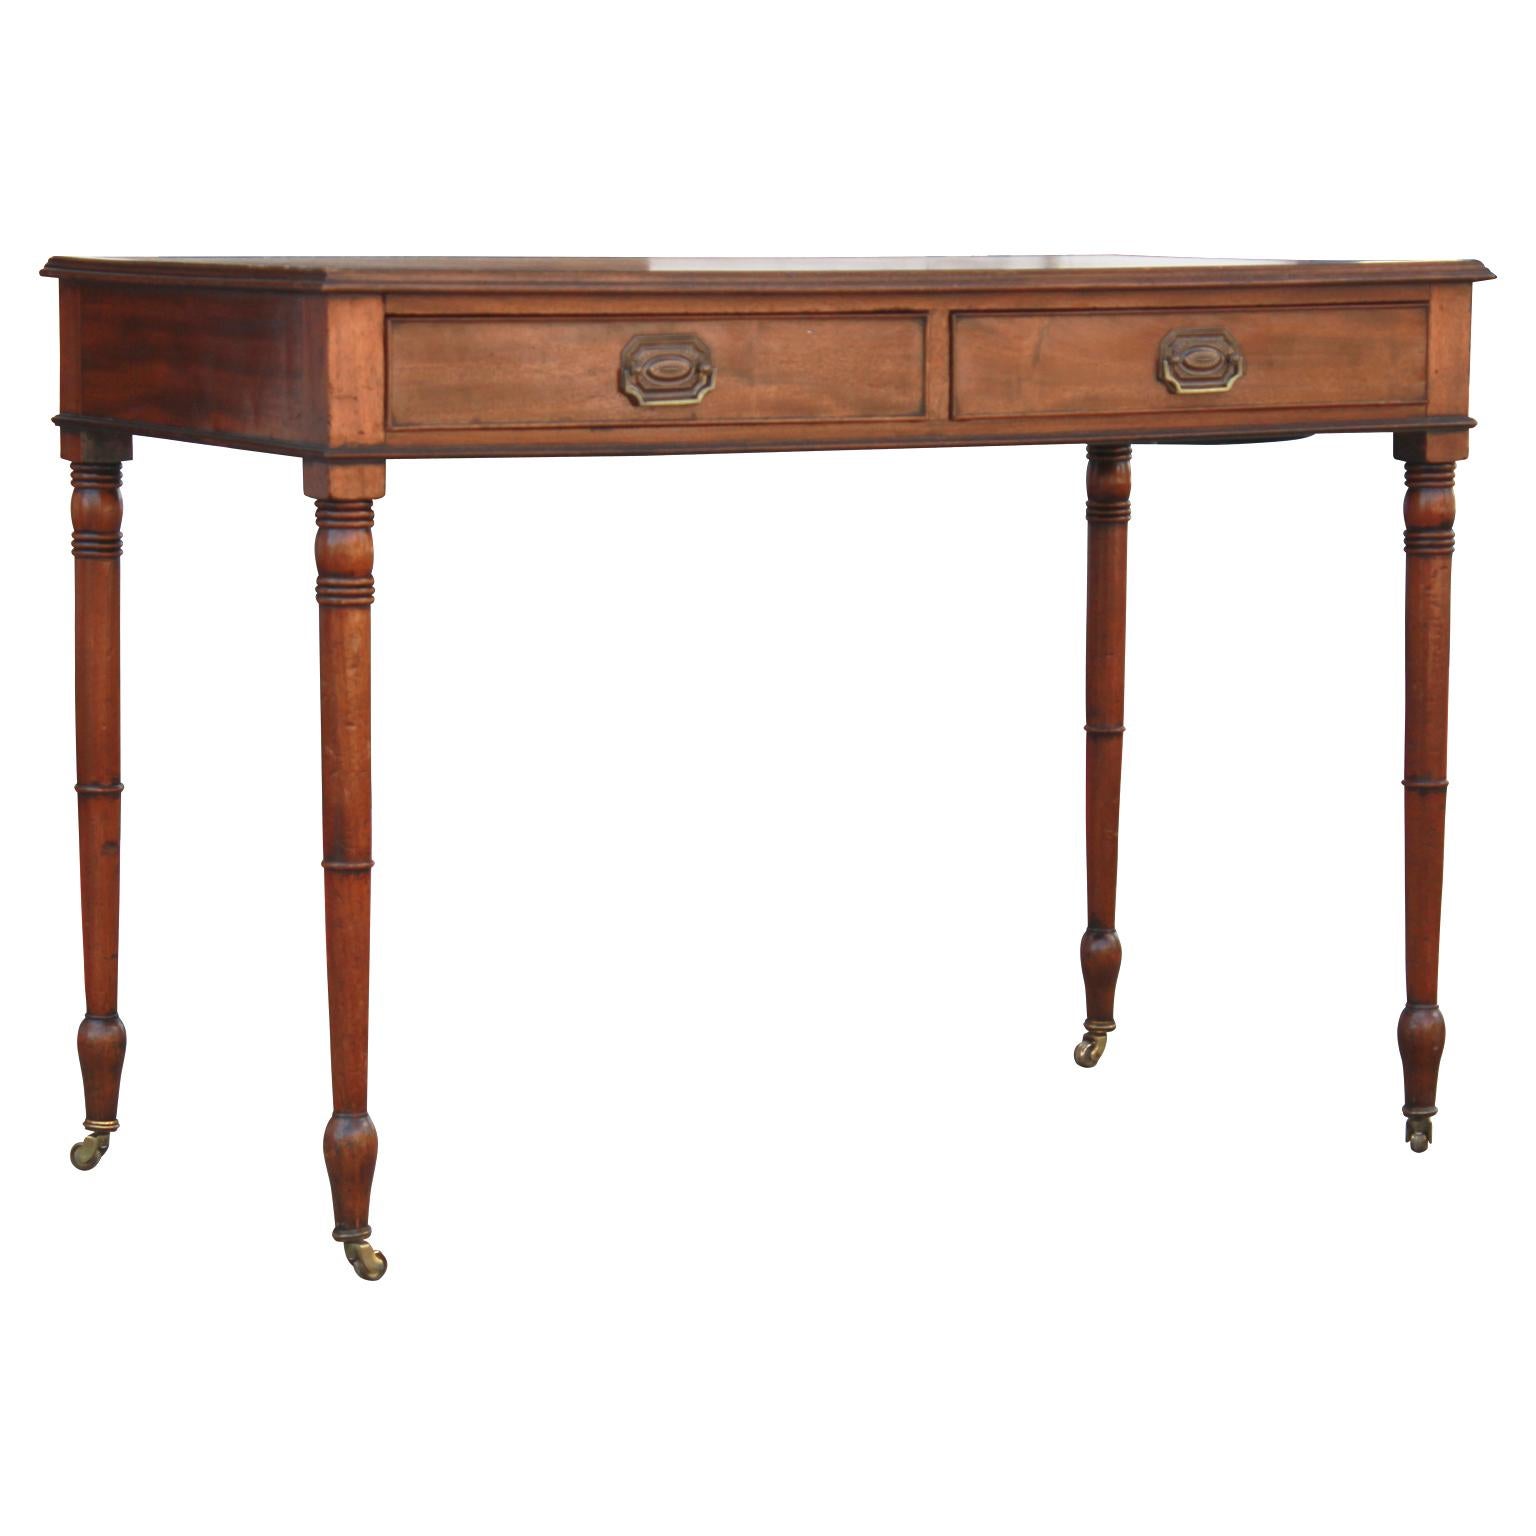 Gorgeous mid-19th century English leather top writing desk, William IV style. Features two drawers. The original hardware believed to have been replaced.